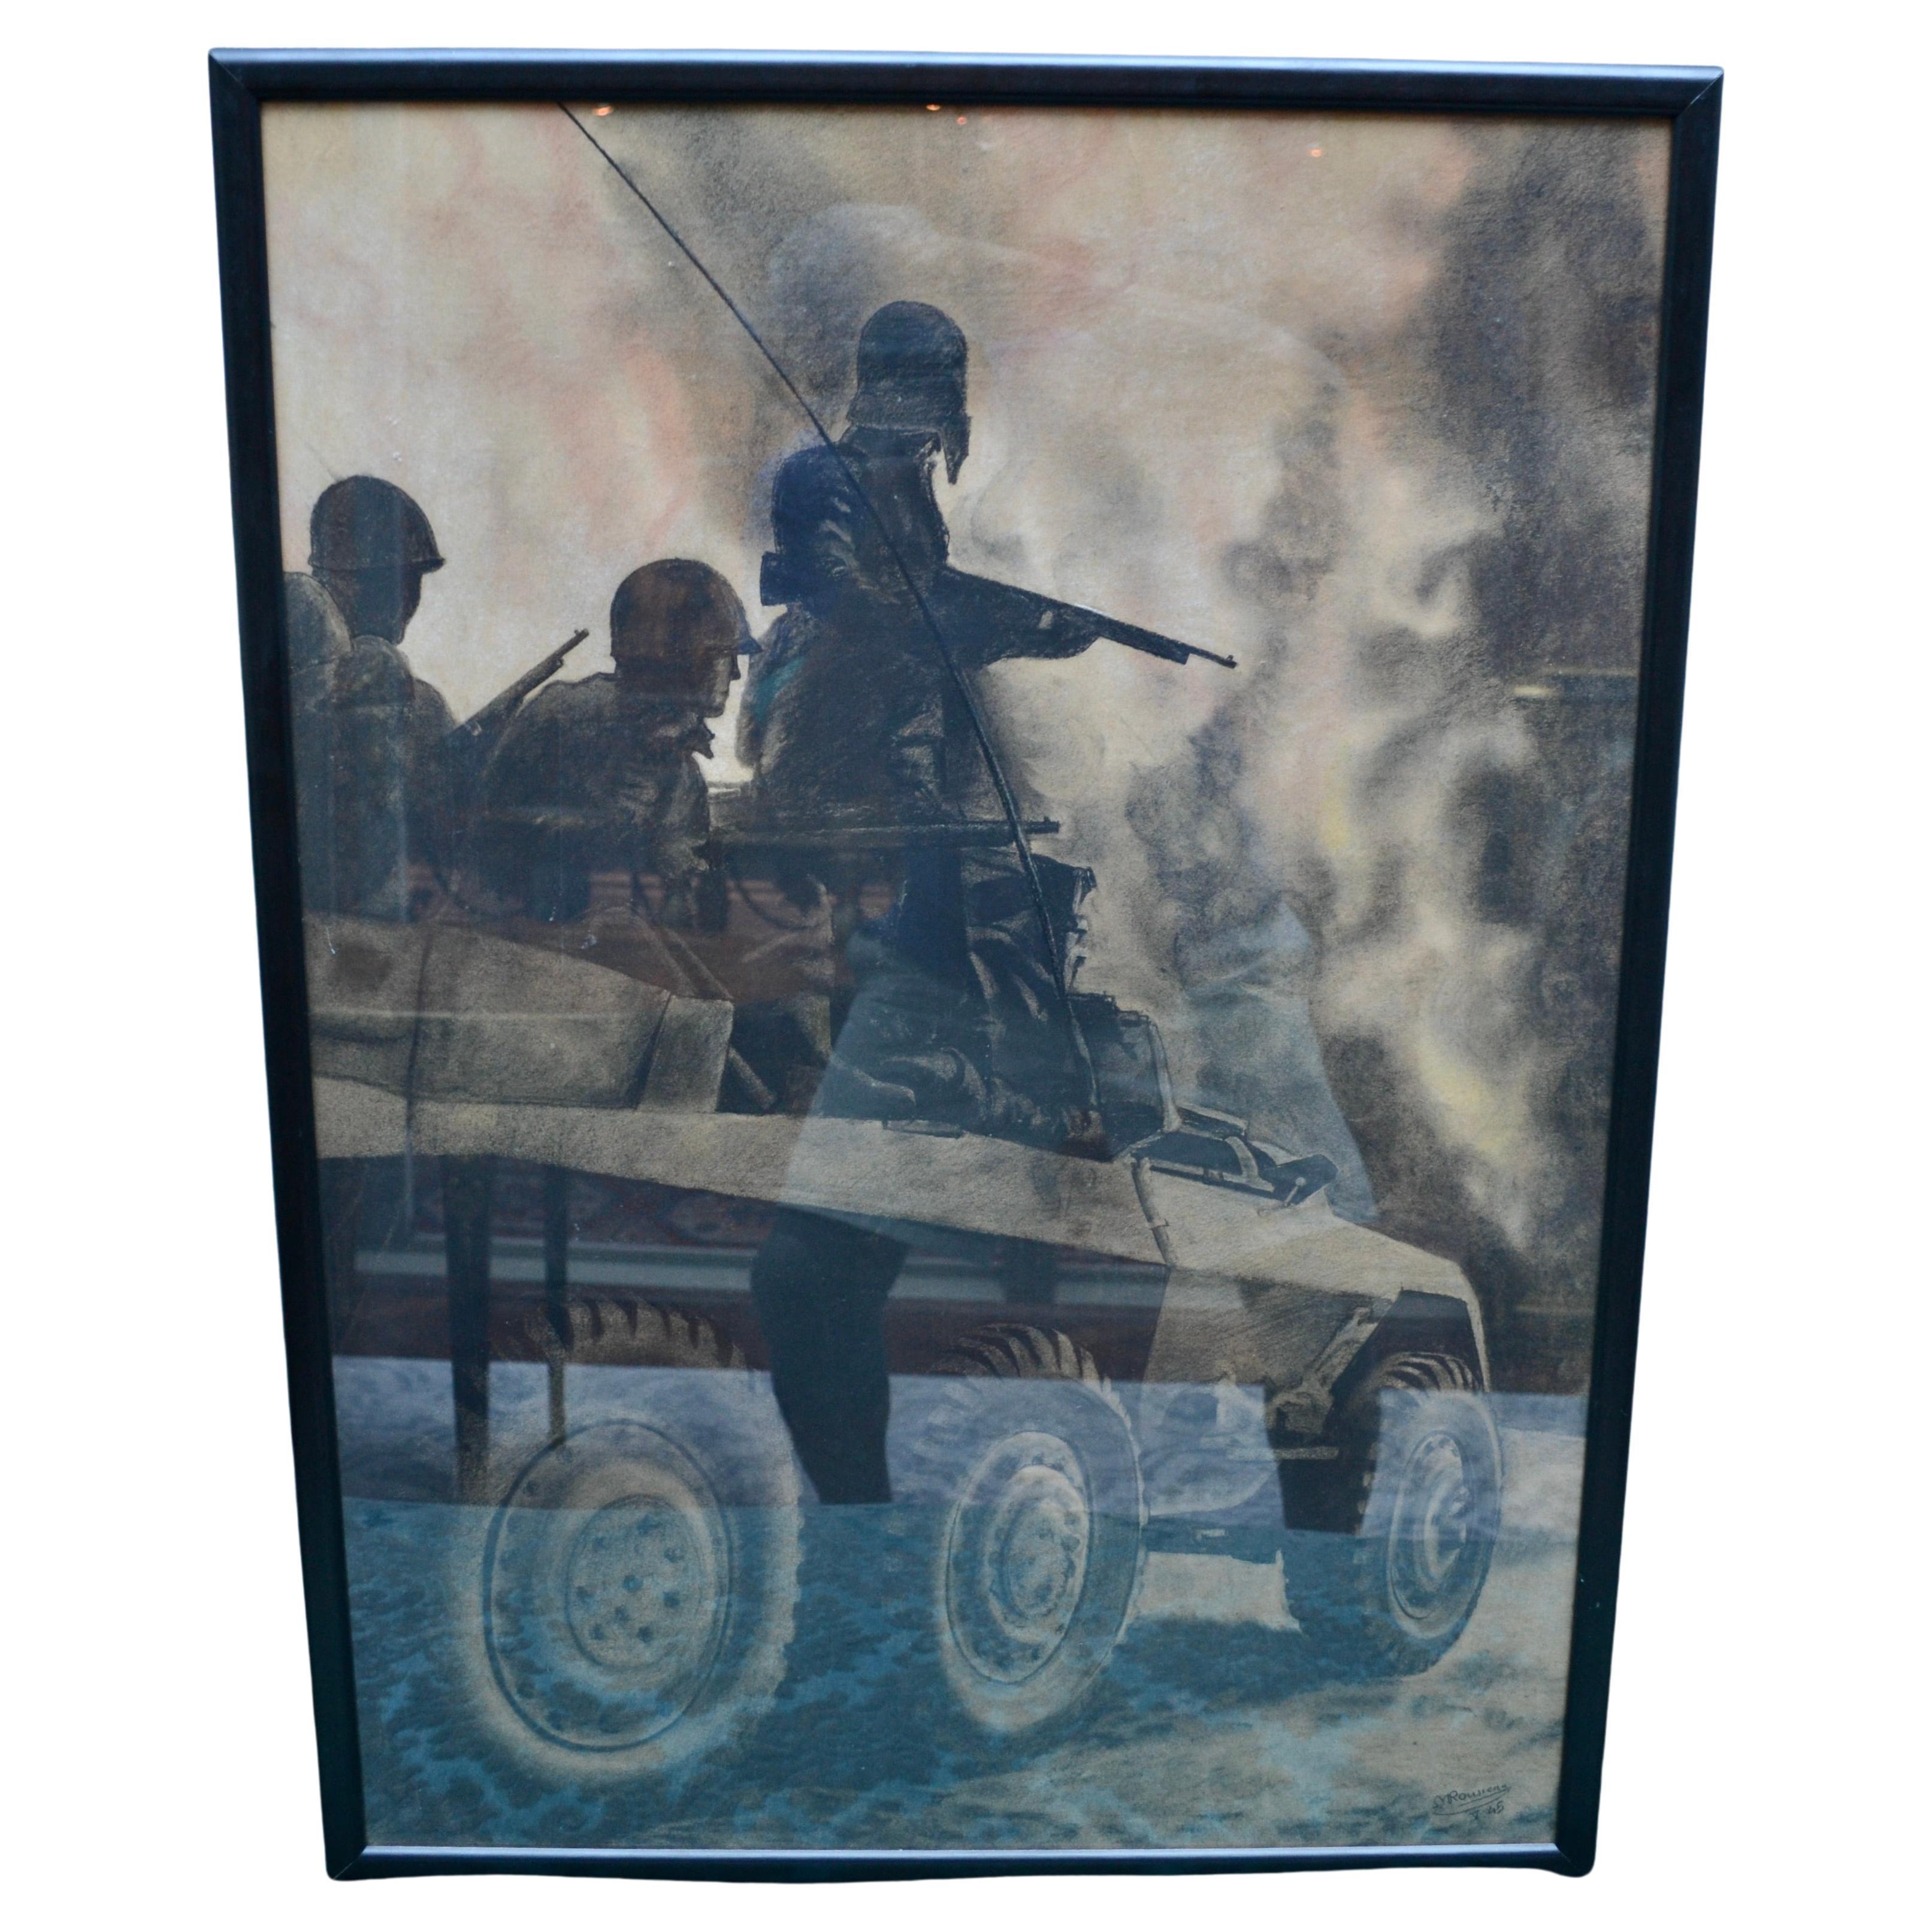   Chalk Drawing of US Army In Action  on an Armored Vehicle in Europe in WWII 